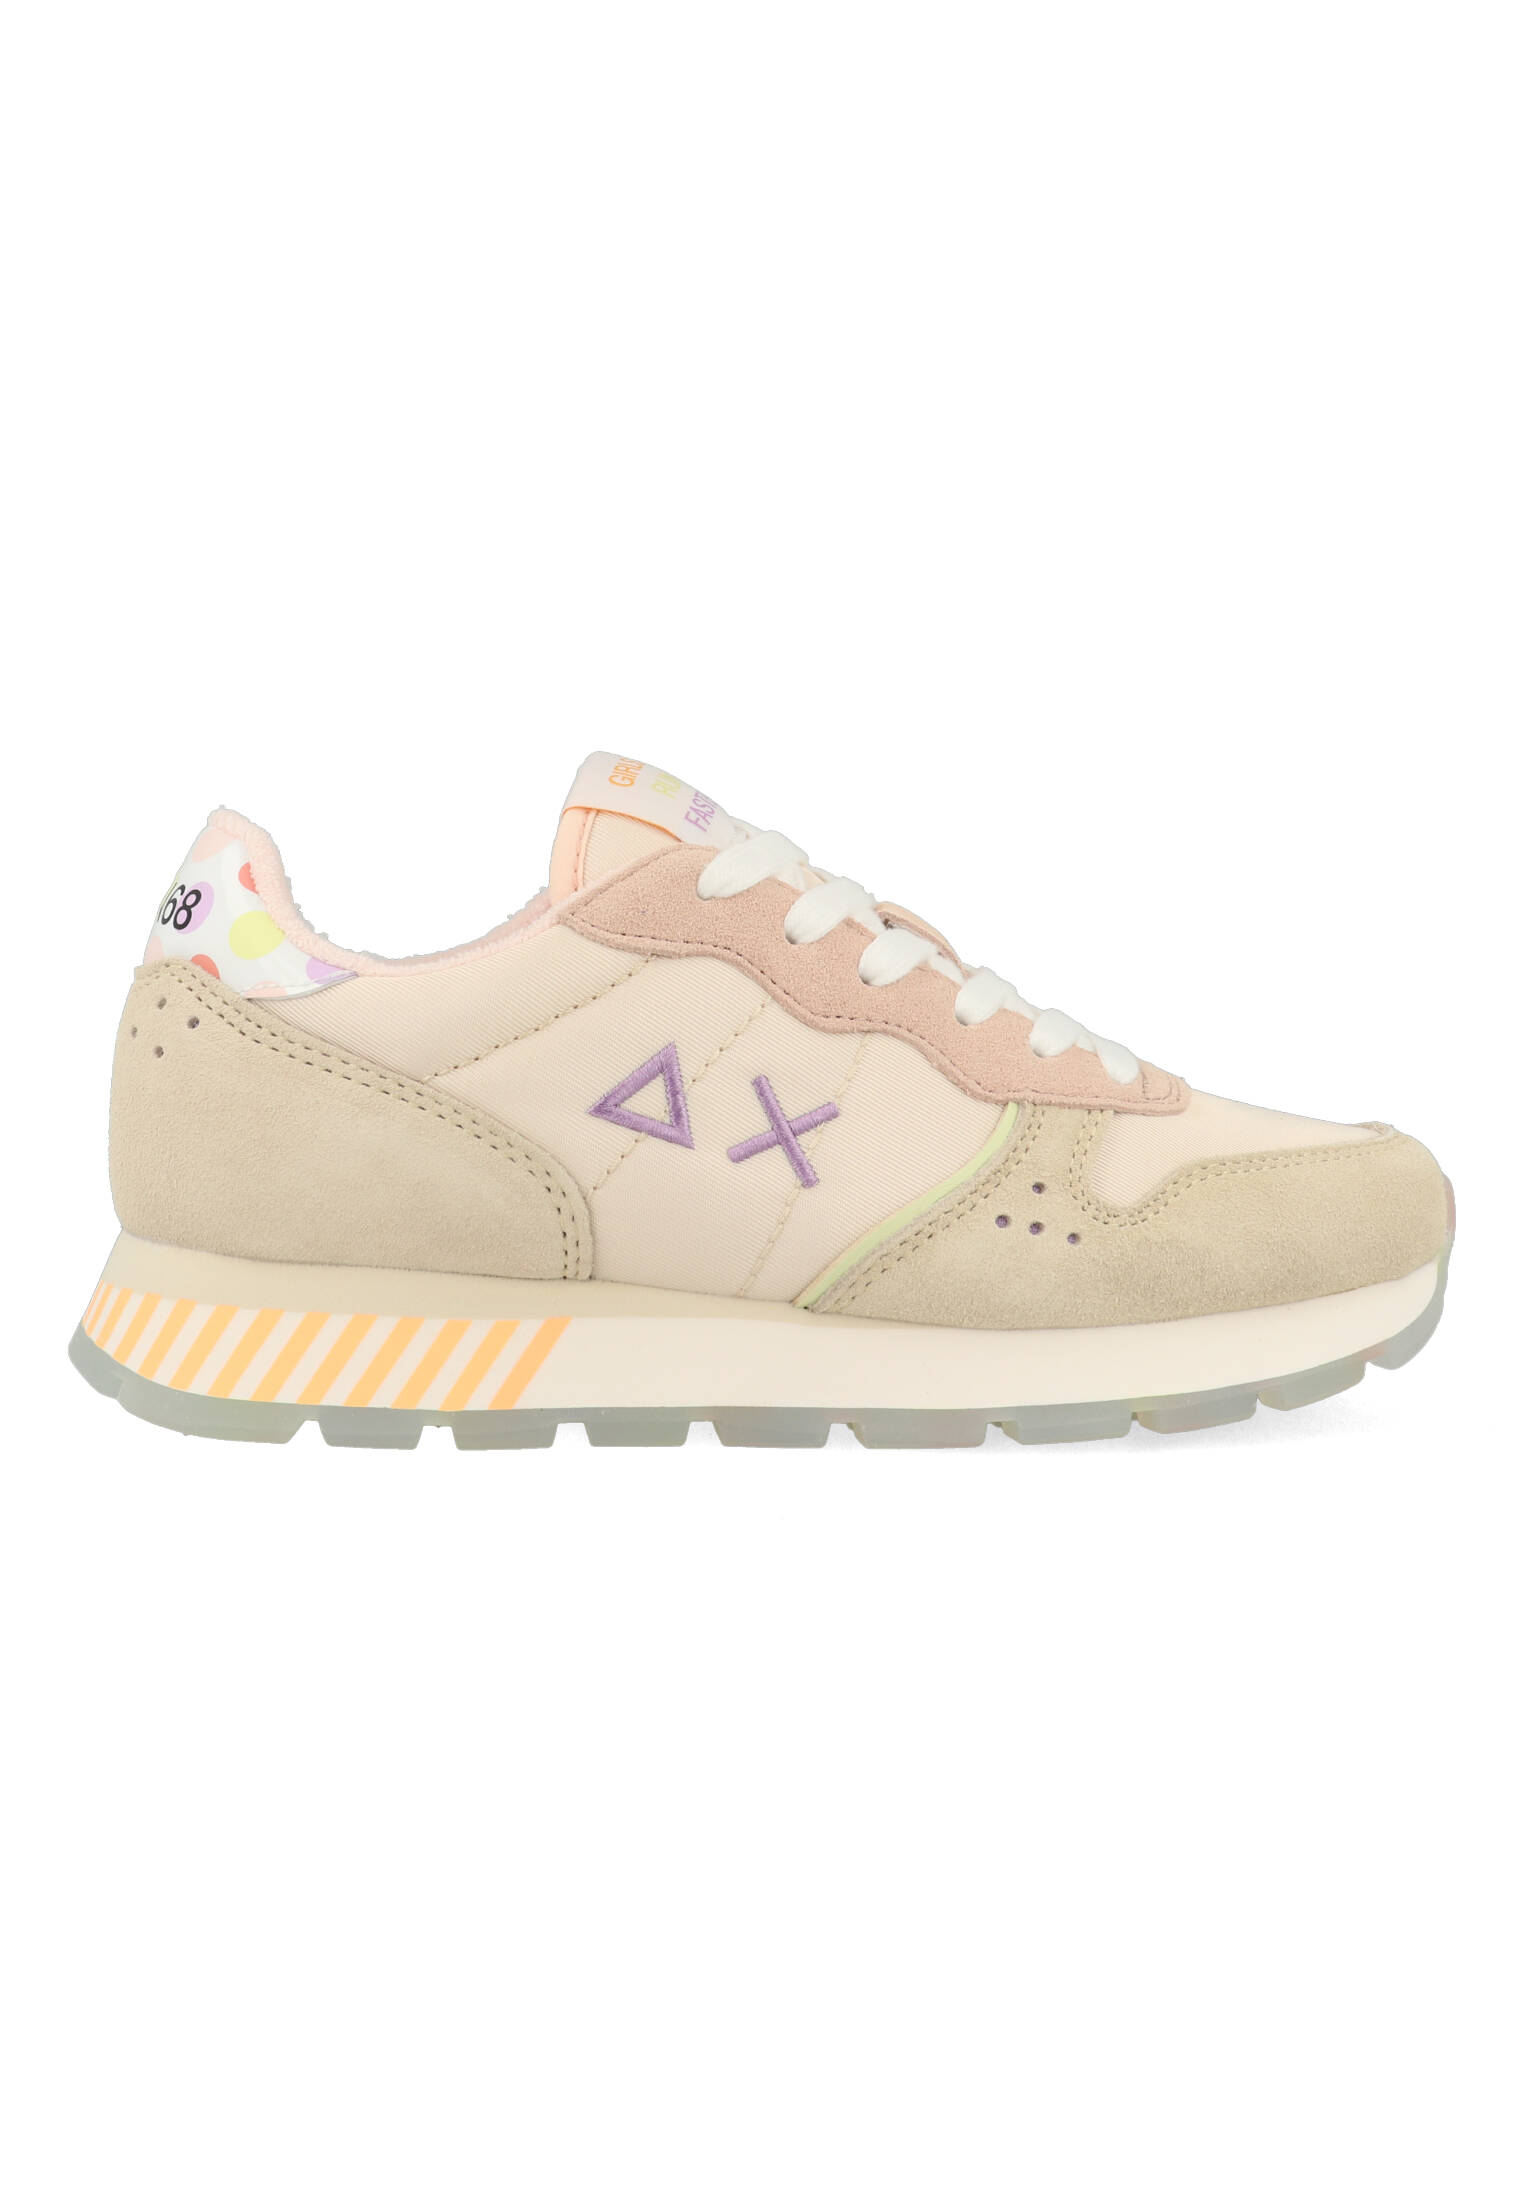 Sun68 Ally Candy Cane Z34205_31 Beige-40 maat 40